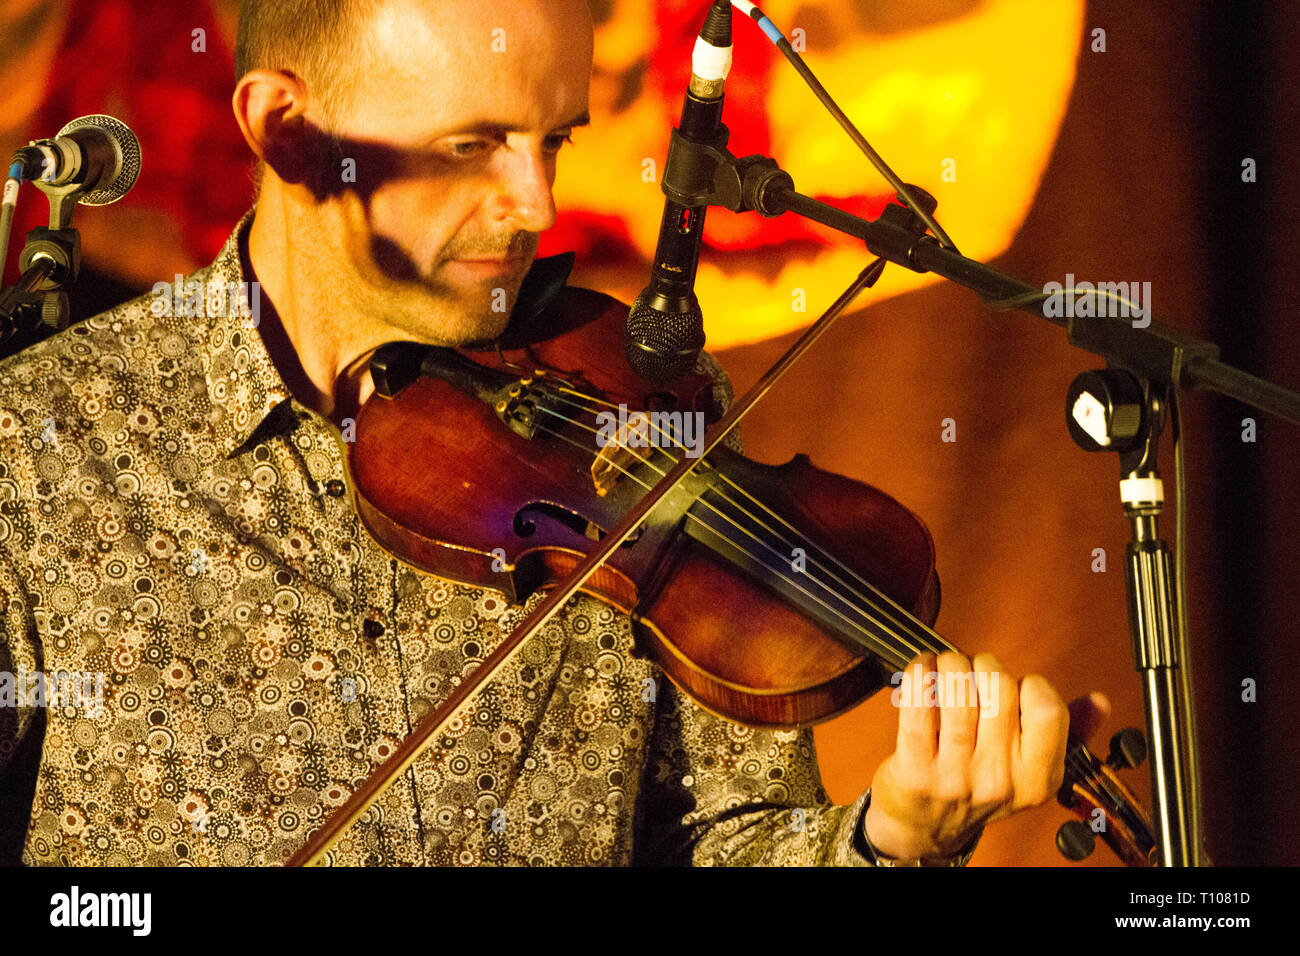 Duncan Chisholm playing live at Trelawnydd Memorial Hall N Wales Stock Photo